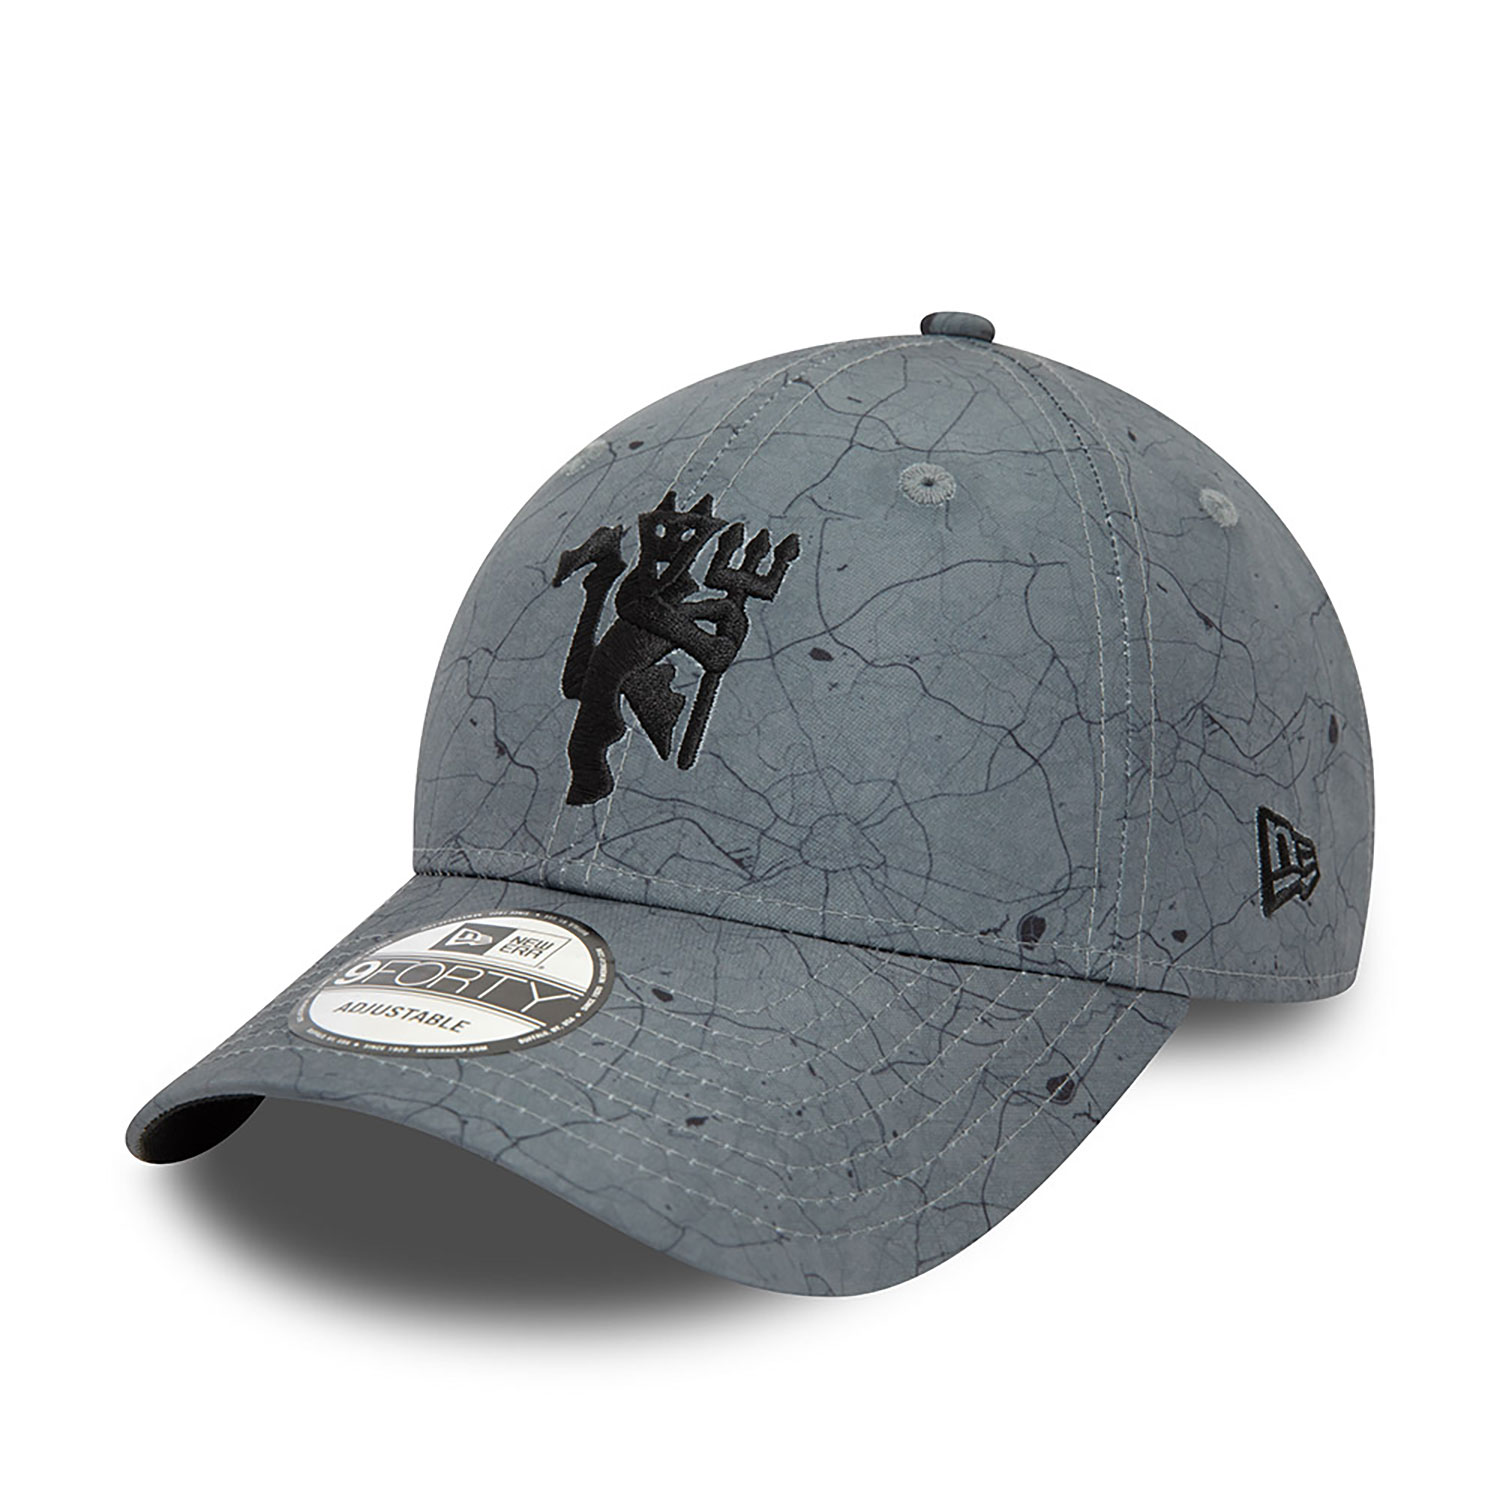 Manchester United FC All Over Print Grey 9FORTY Adjustable Cap